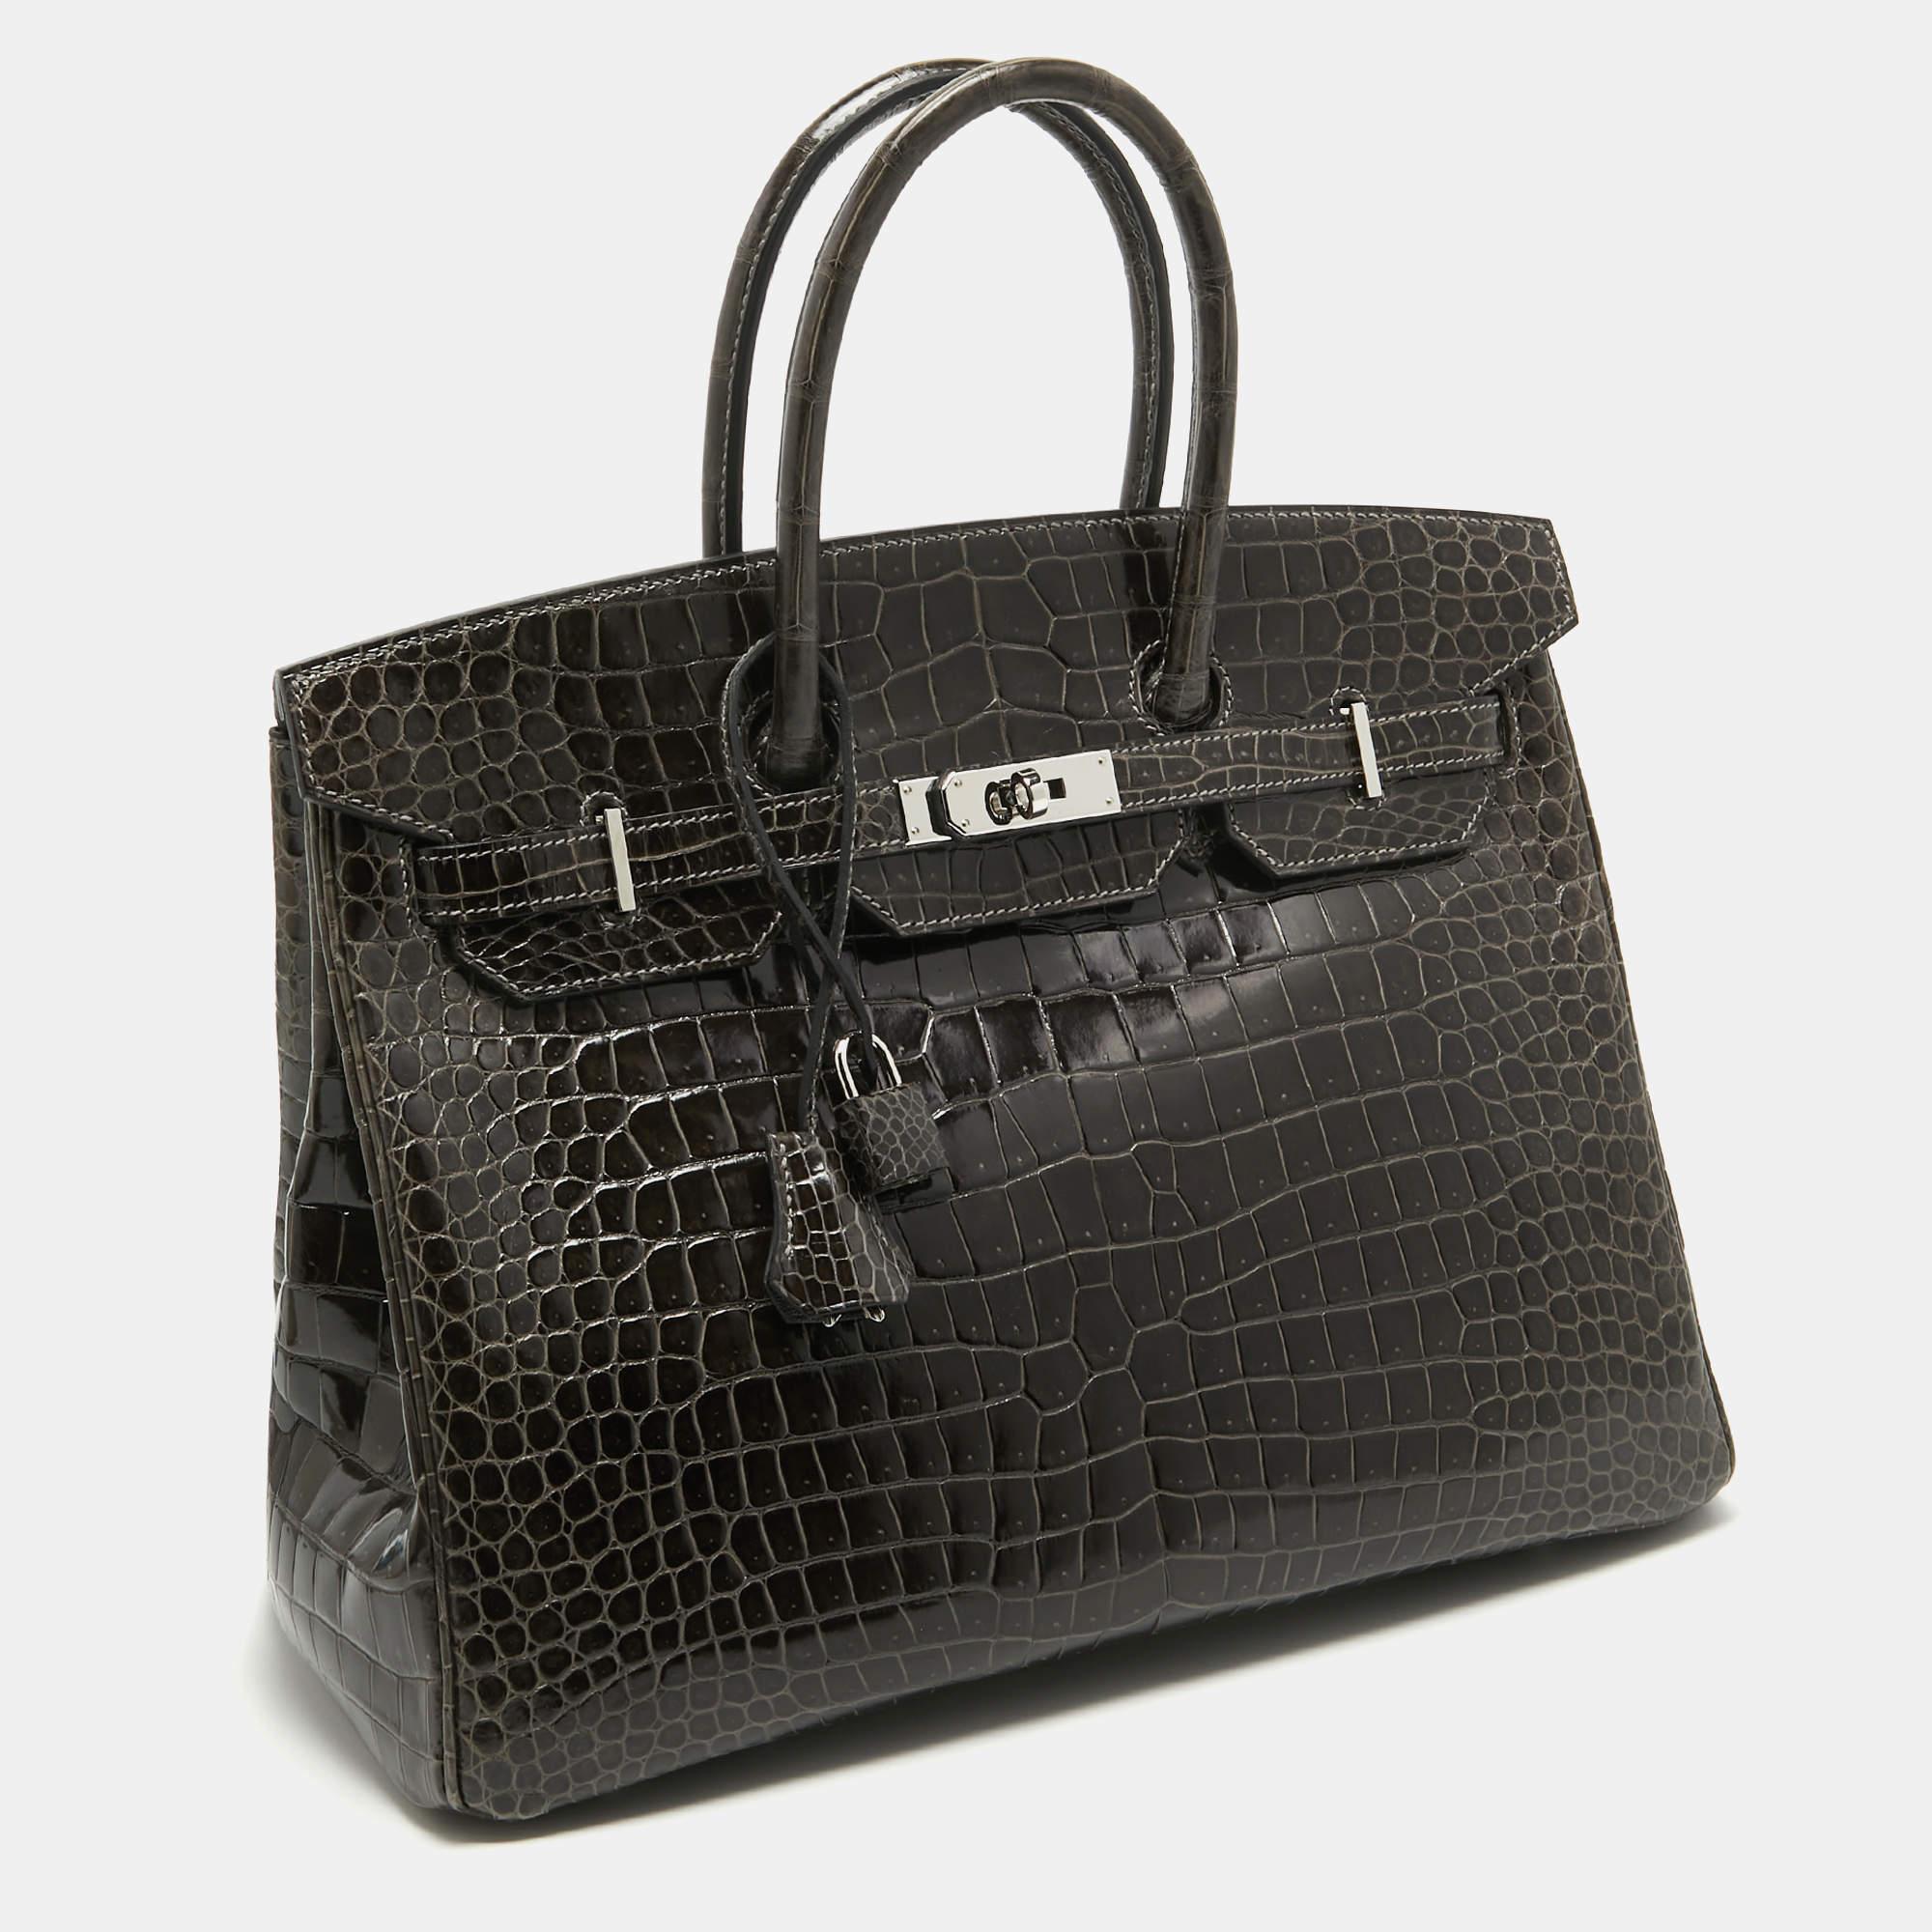 The Hermès Birkin is rightly one of the most desired handbags in the world. Handcrafted from the highest quality leather by skilled artisans, it takes long hours of rigorous effort to stitch a Birkin together. Crafted with expertise, this crocodile